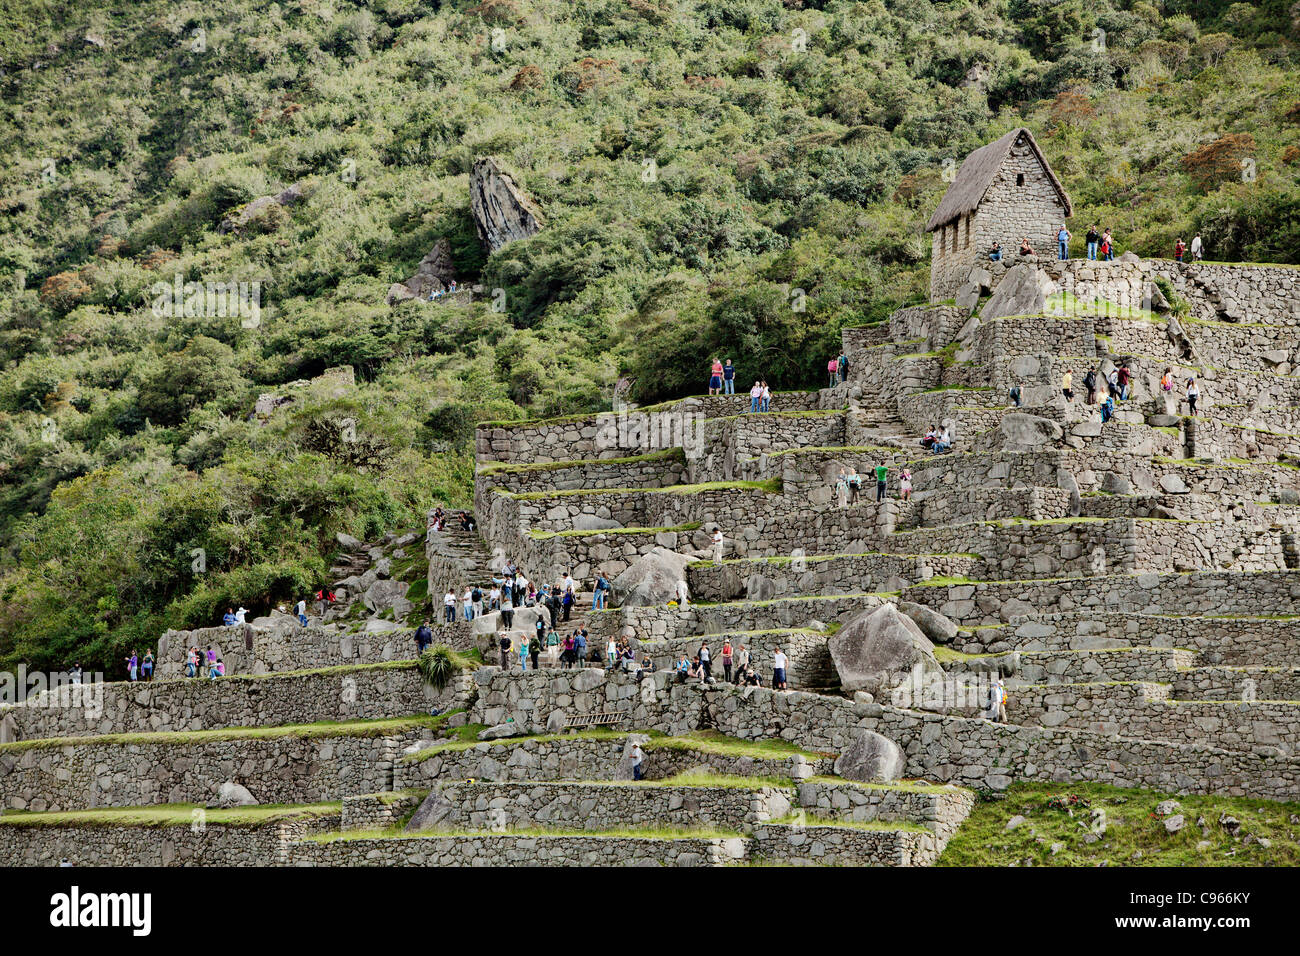 Hundreds of tourists at ancient Inca ruins of Machu Picchu, the most known tourist site in Andes mountains, Peru. Stock Photo